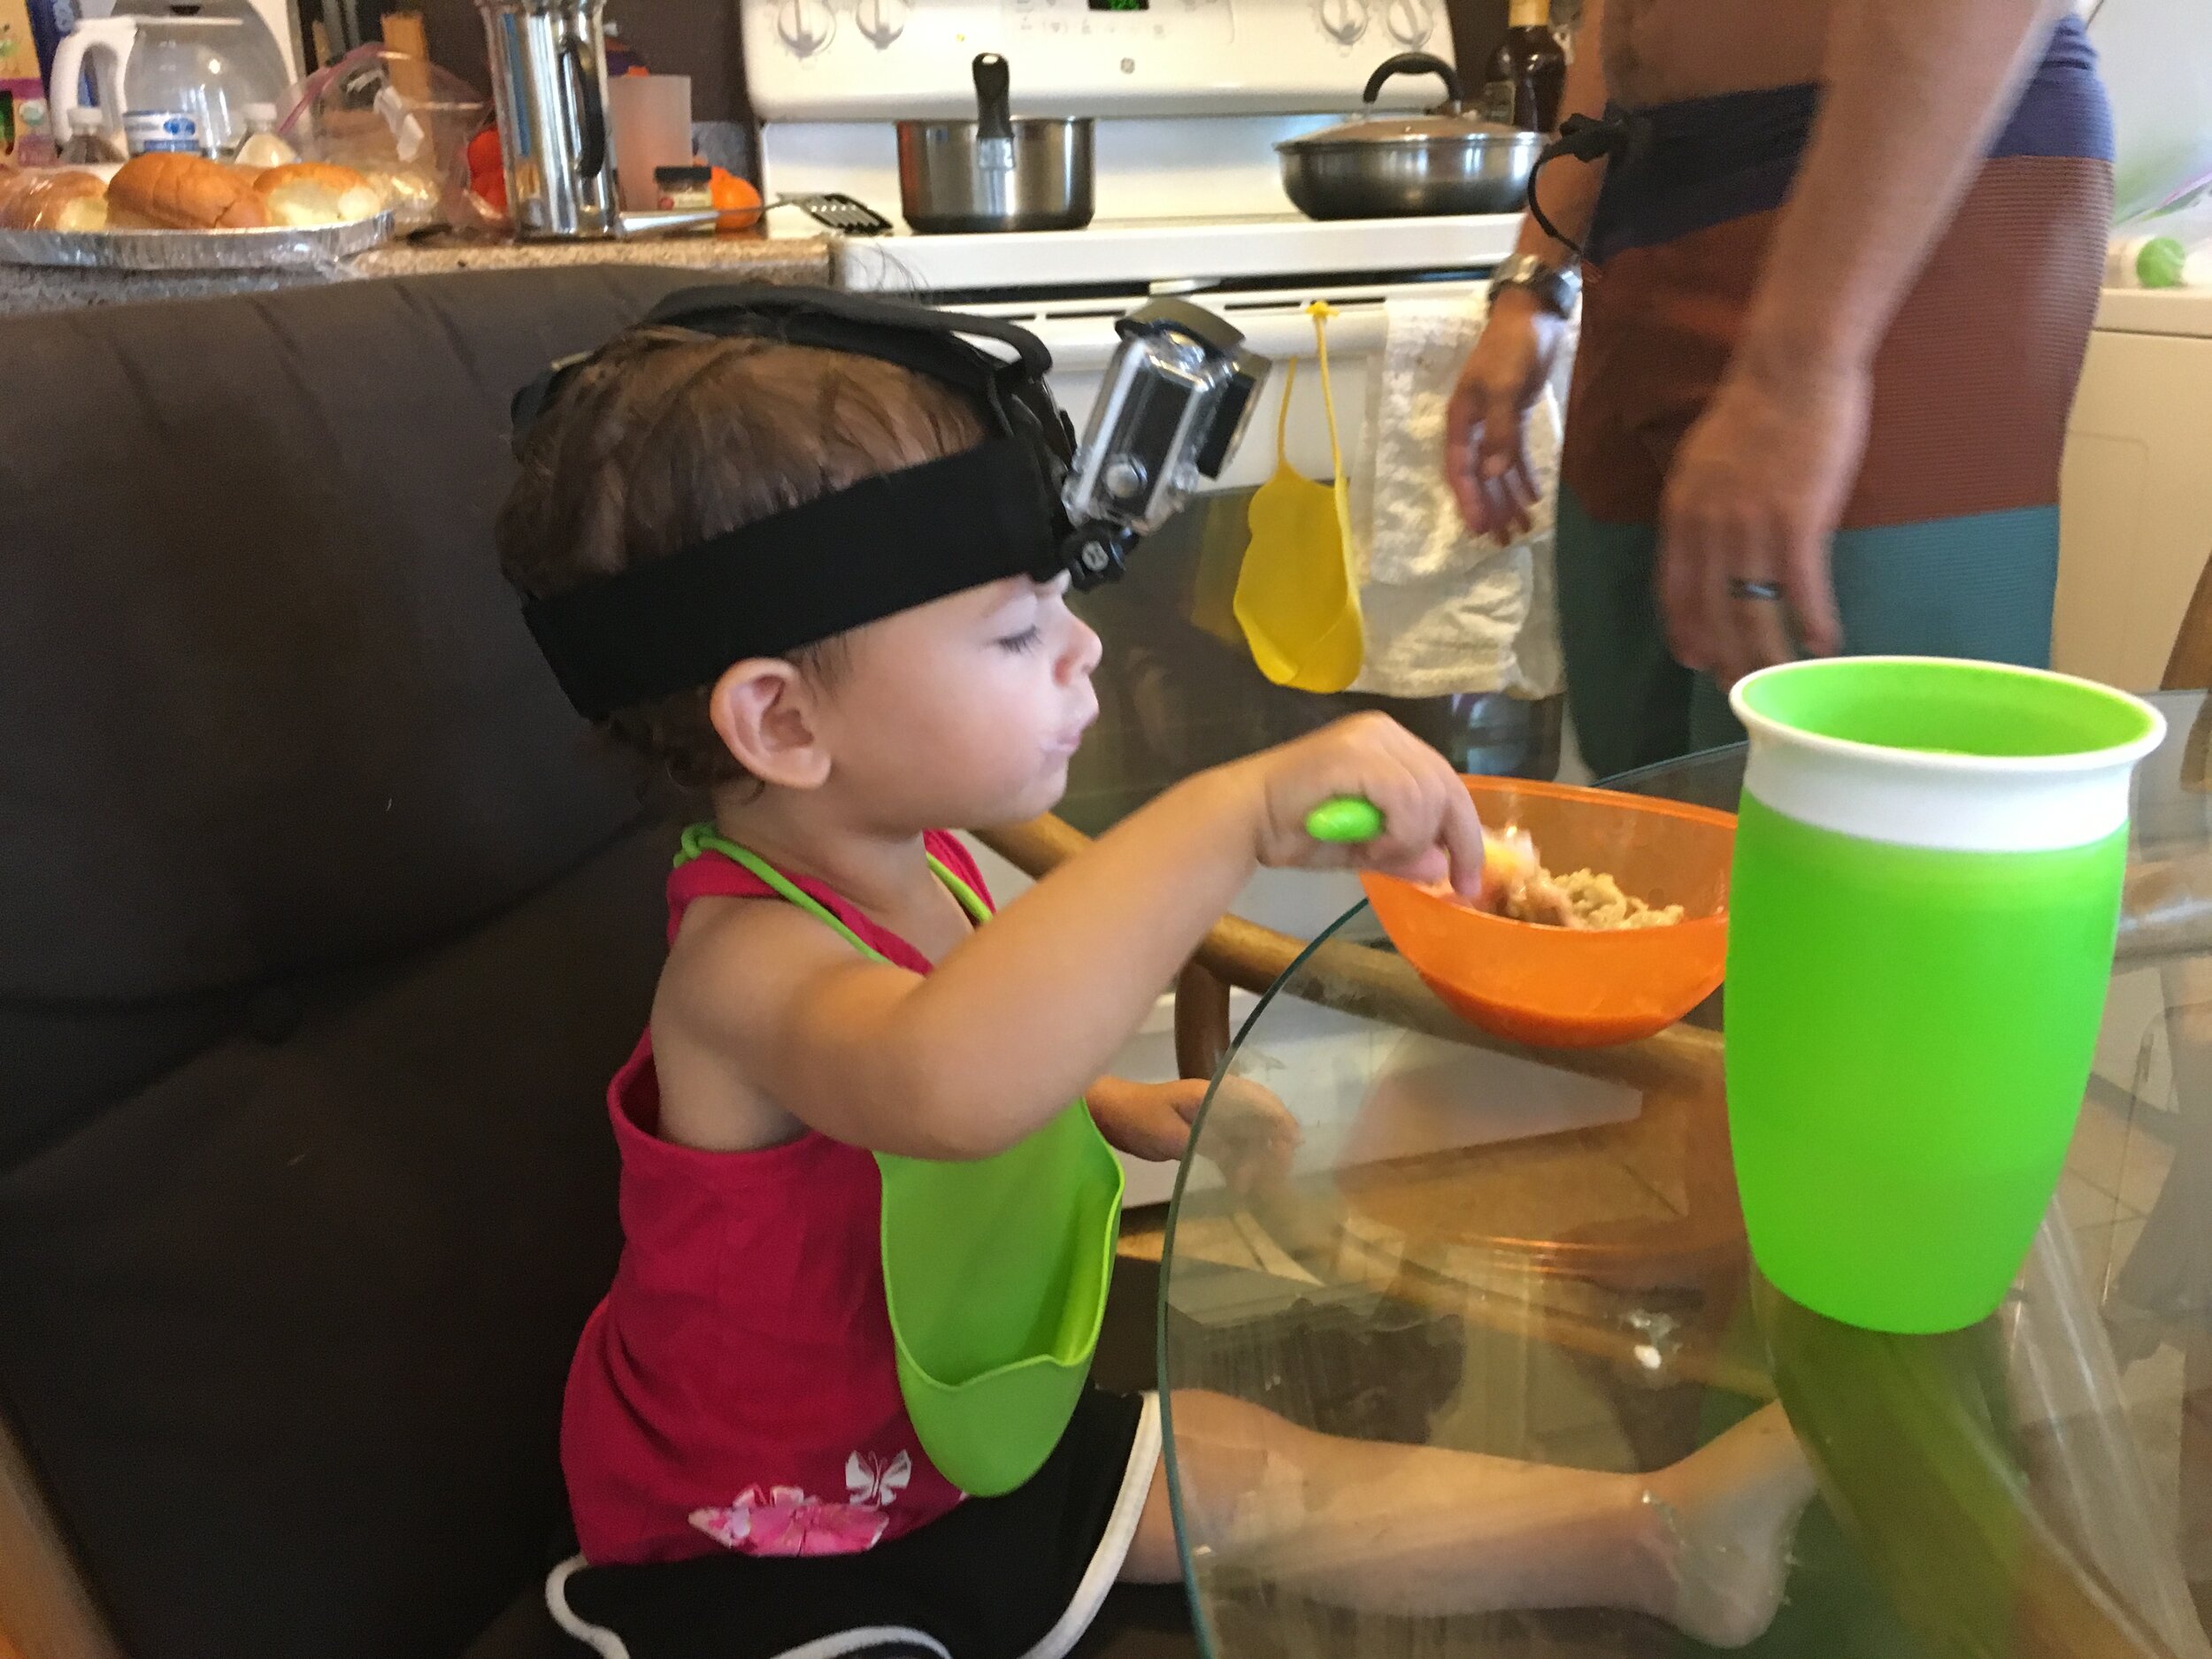 Genevieve eating breakfast. (She wanted to wear the go pro head mount. lol)